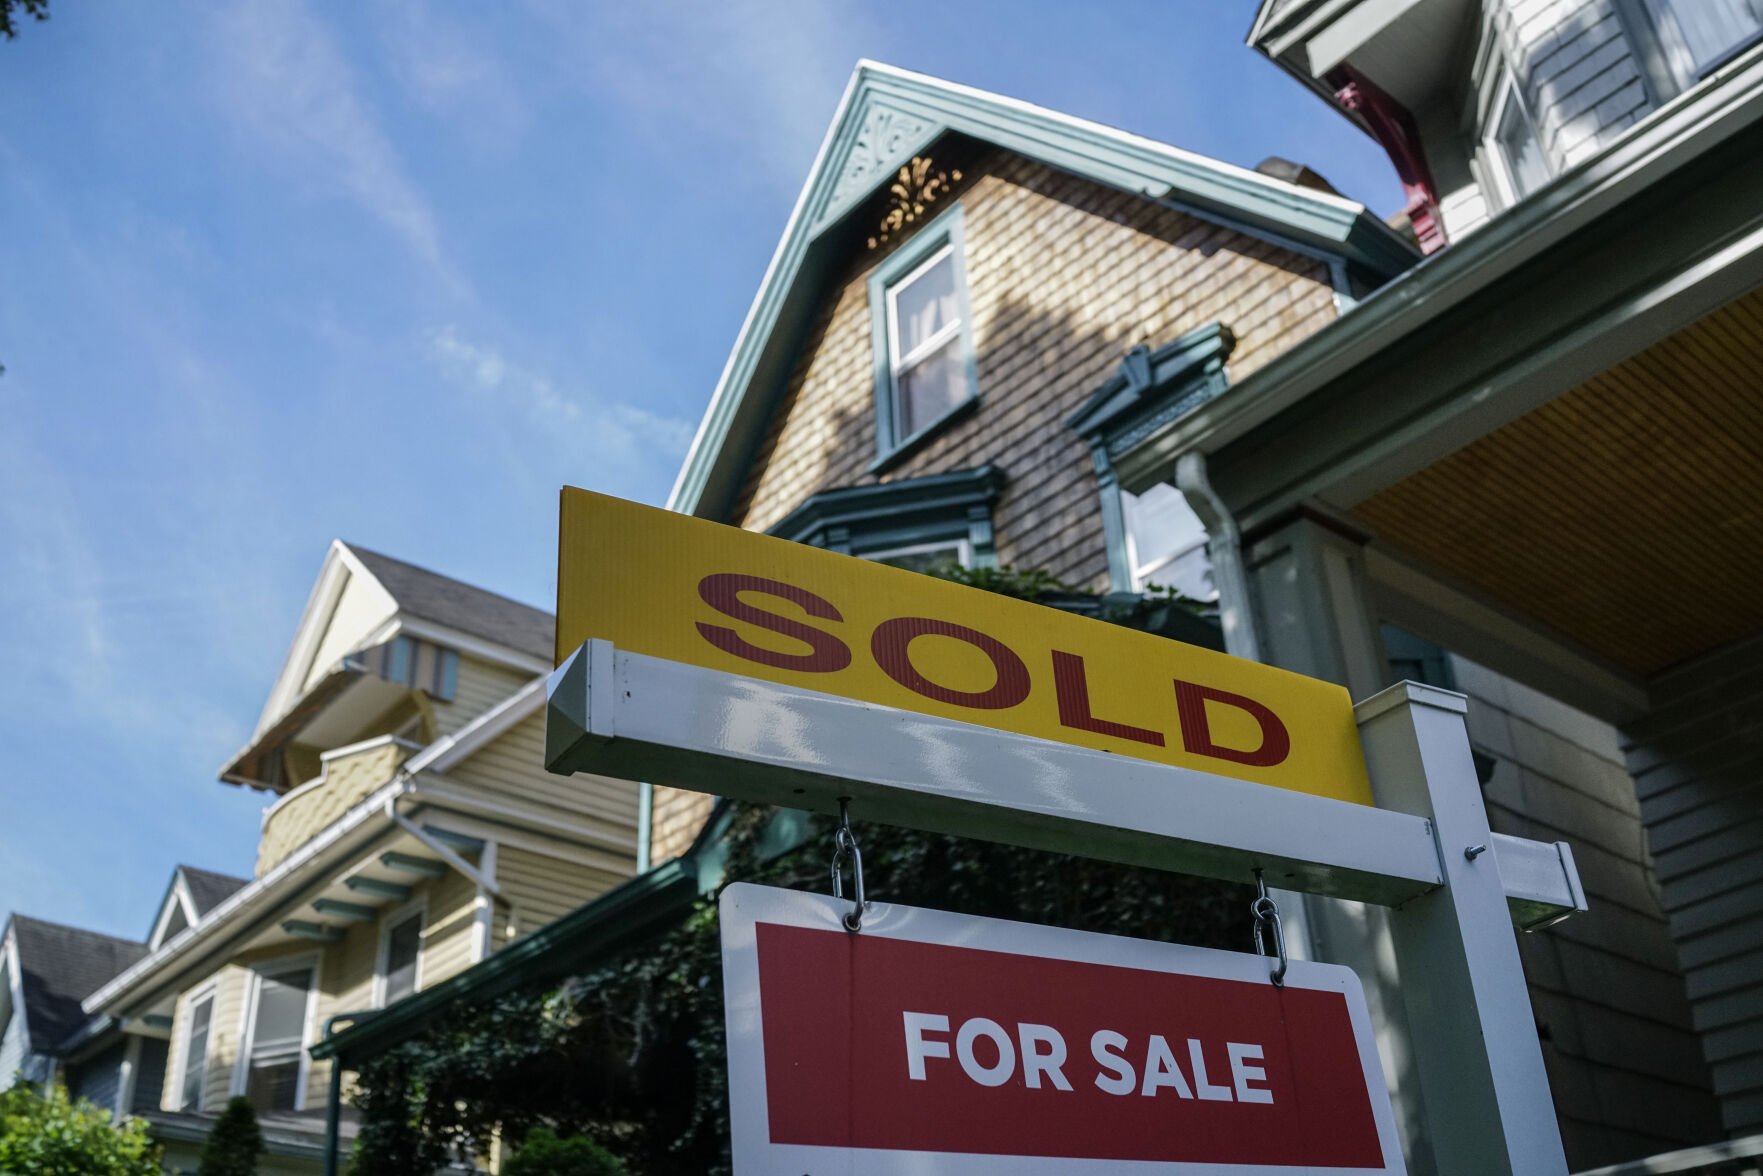 erie county real estate transactions 2019